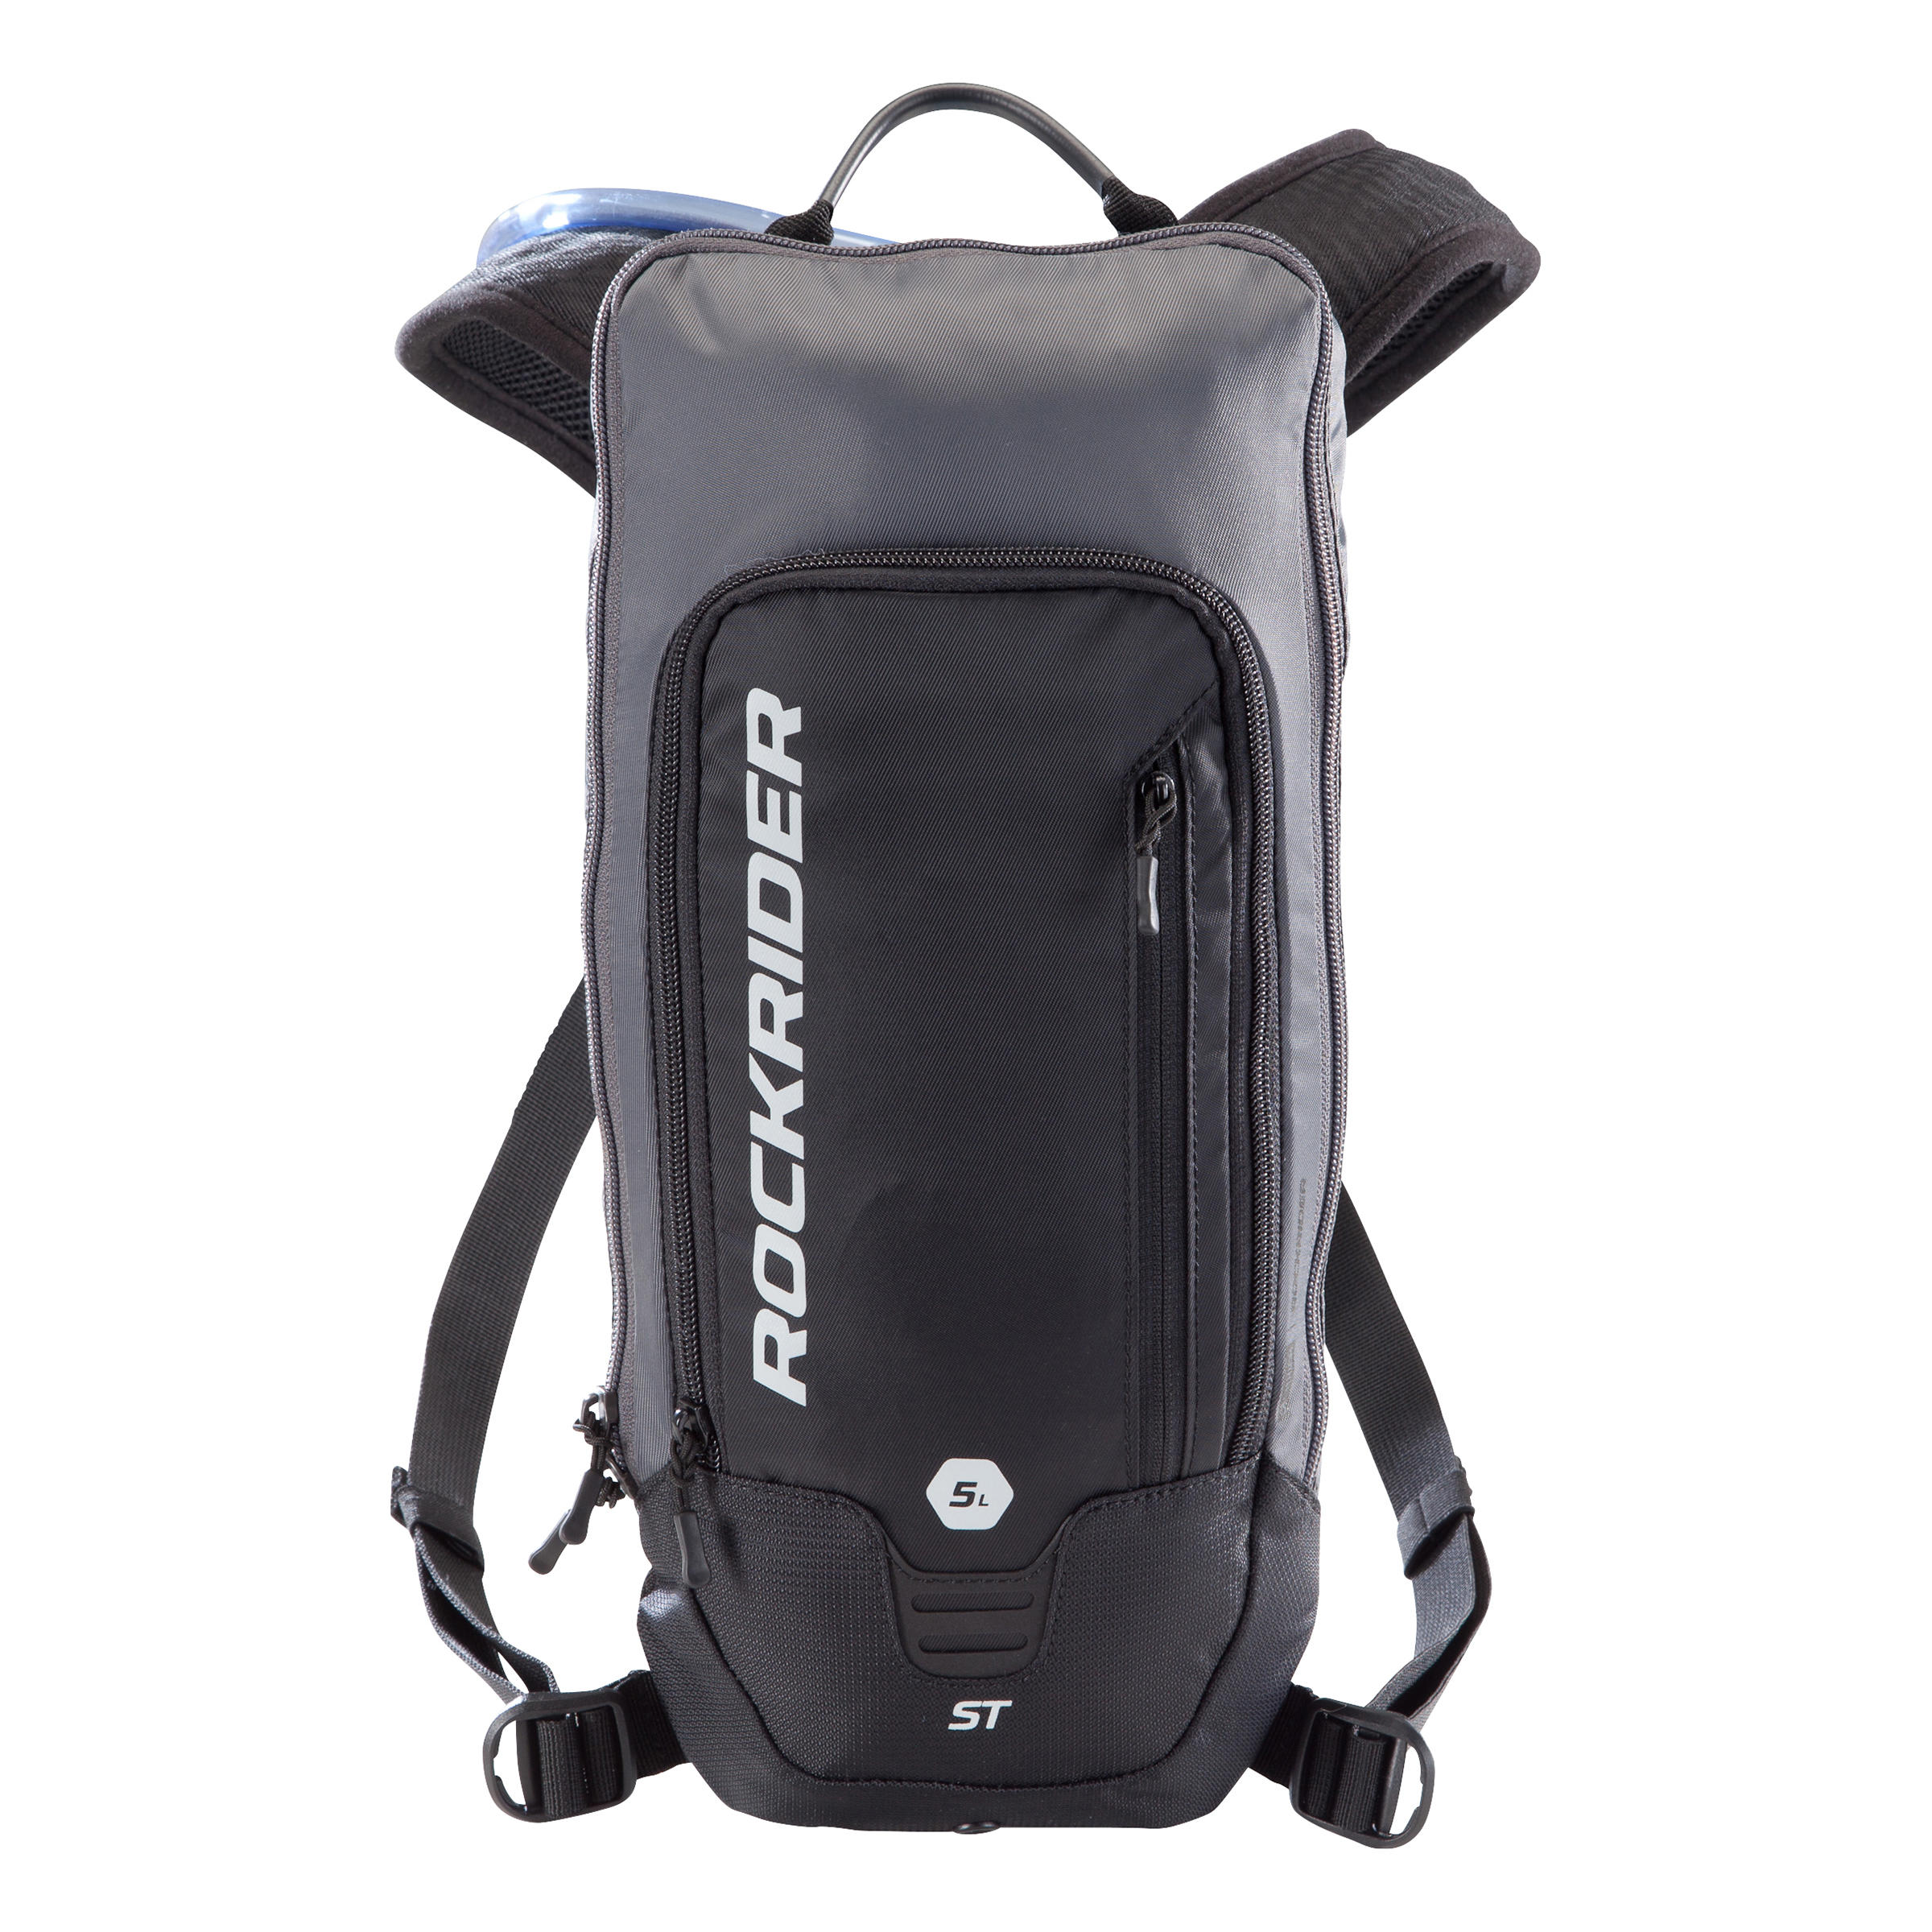 decathlon hydration pack review